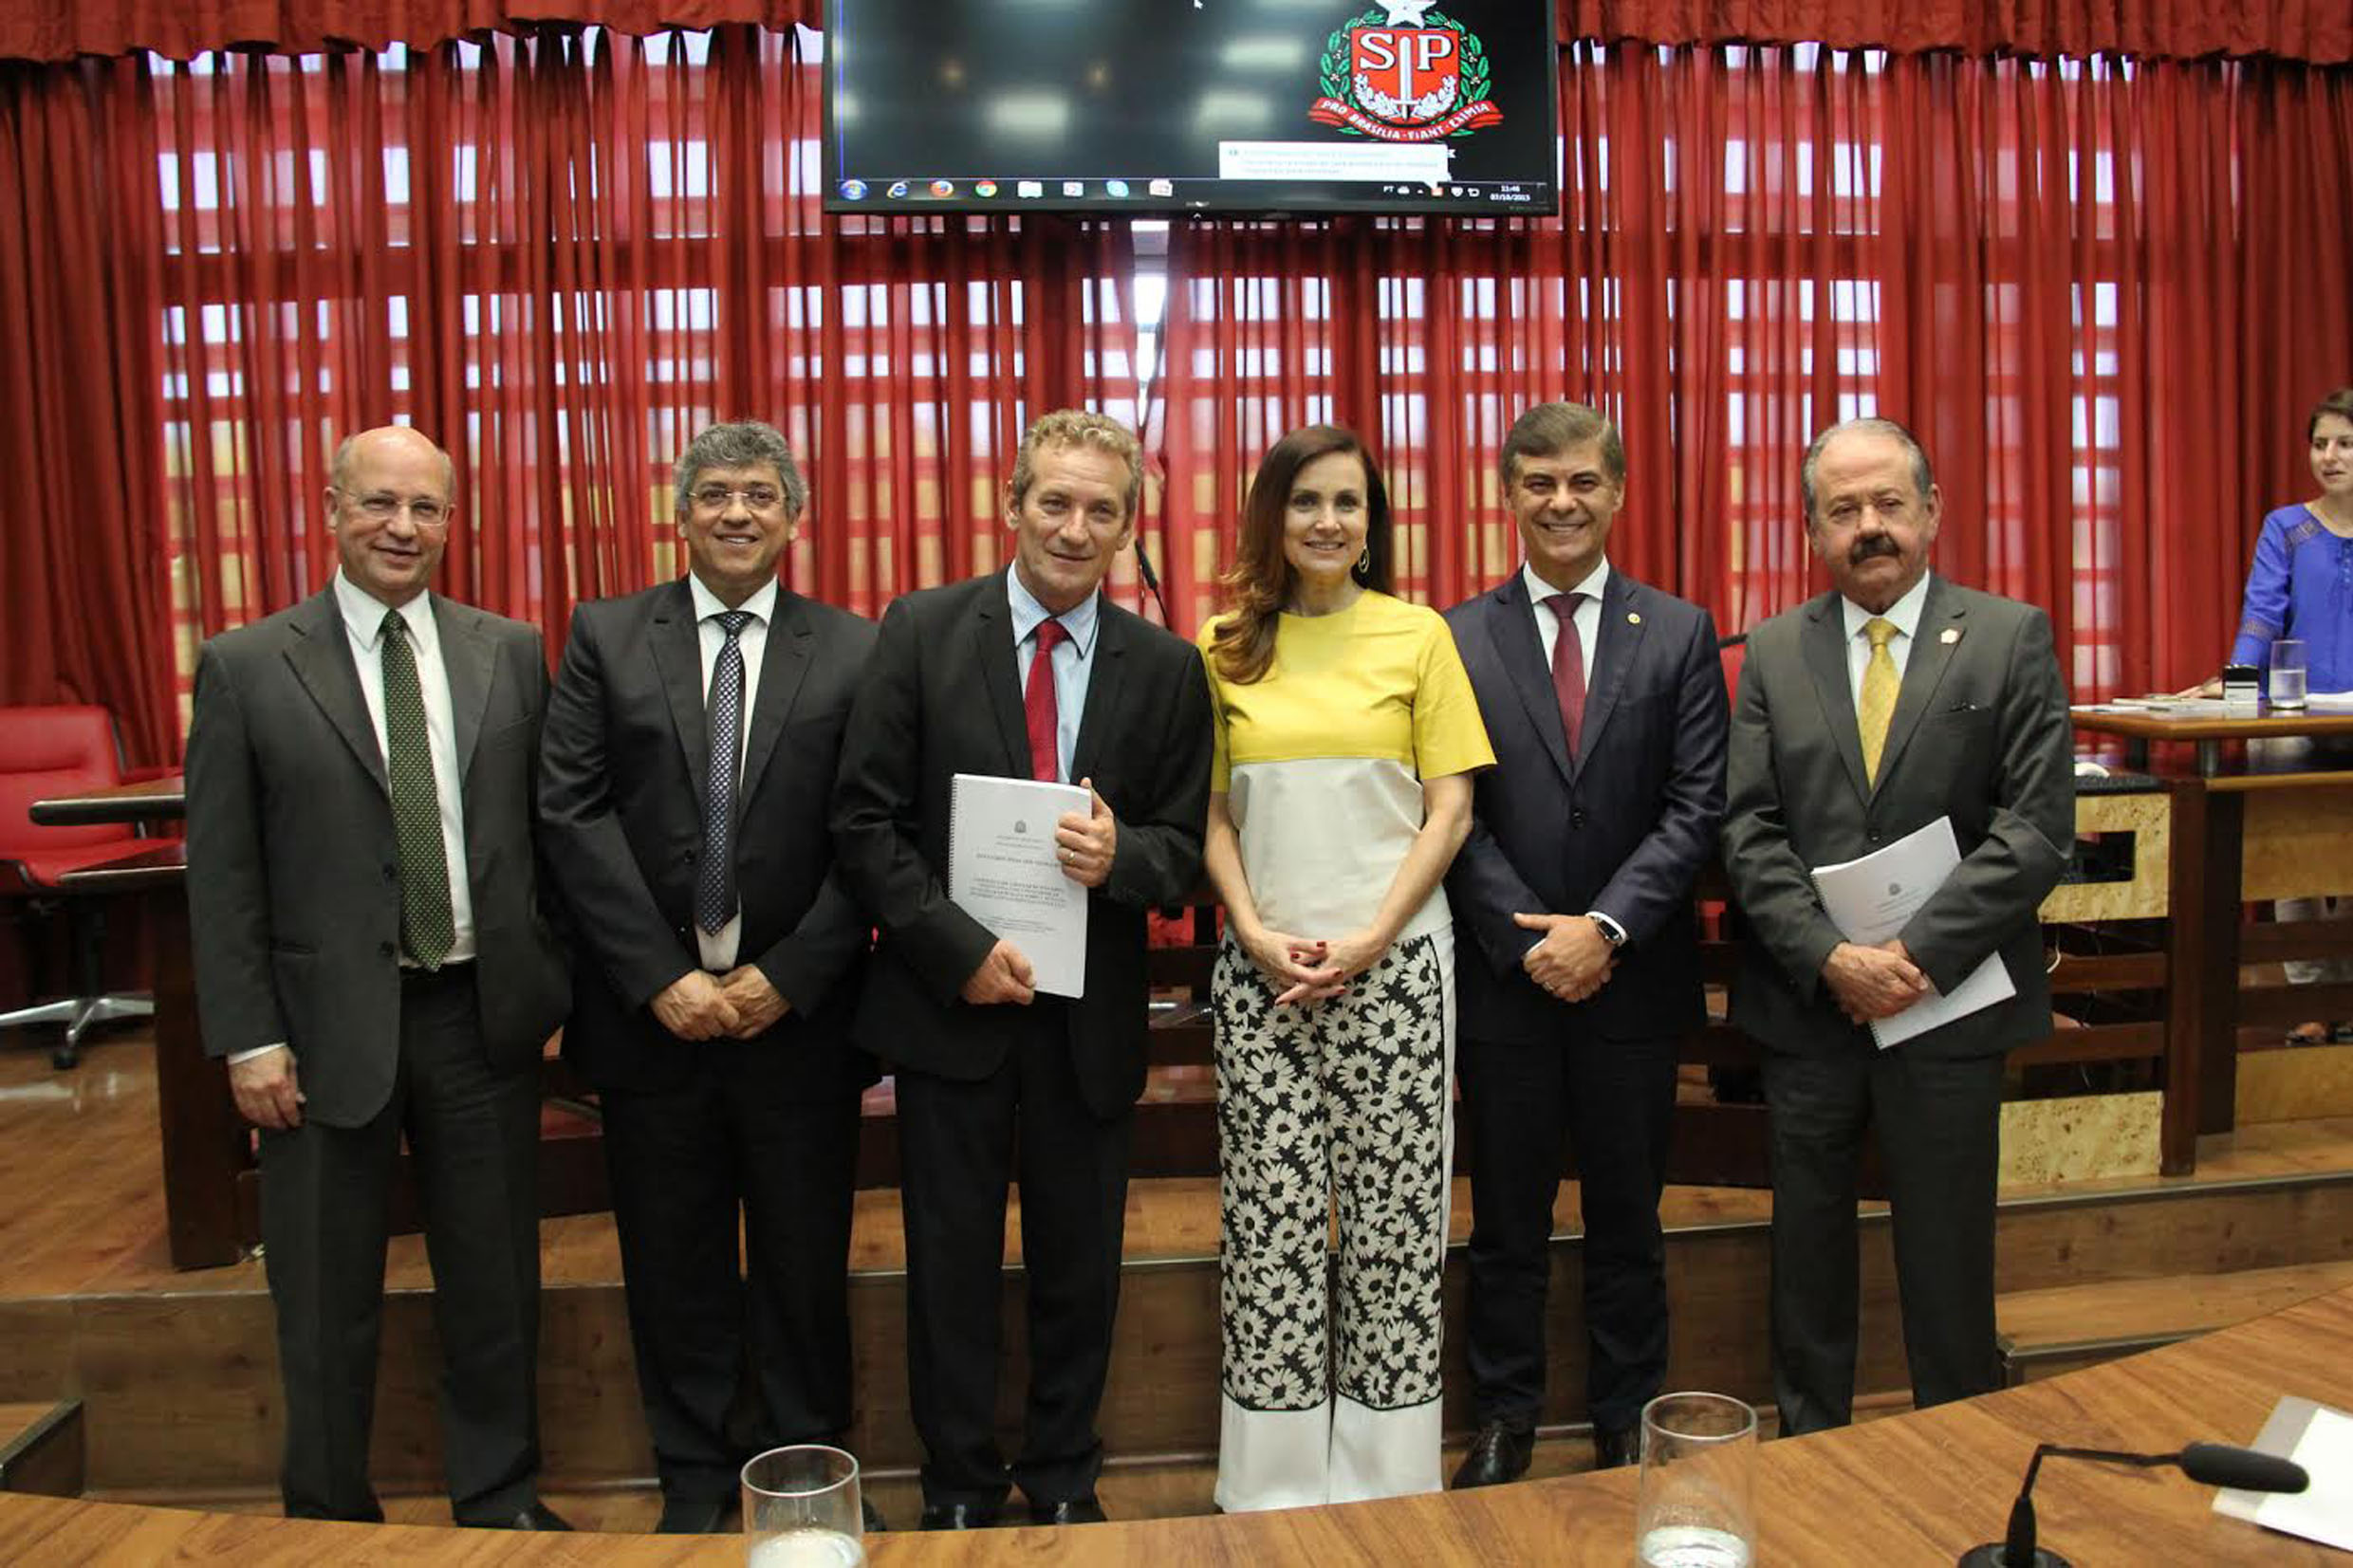 Carlos Neder, Padre Afonso, Ed Thomas, Analice Fernandes, Gil Lancaster e Celso Giglio<a style='float:right;color:#ccc' href='https://www3.al.sp.gov.br/repositorio/noticia/N-10-2015/fg176825.jpg' target=_blank><i class='bi bi-zoom-in'></i> Clique para ver a imagem </a>